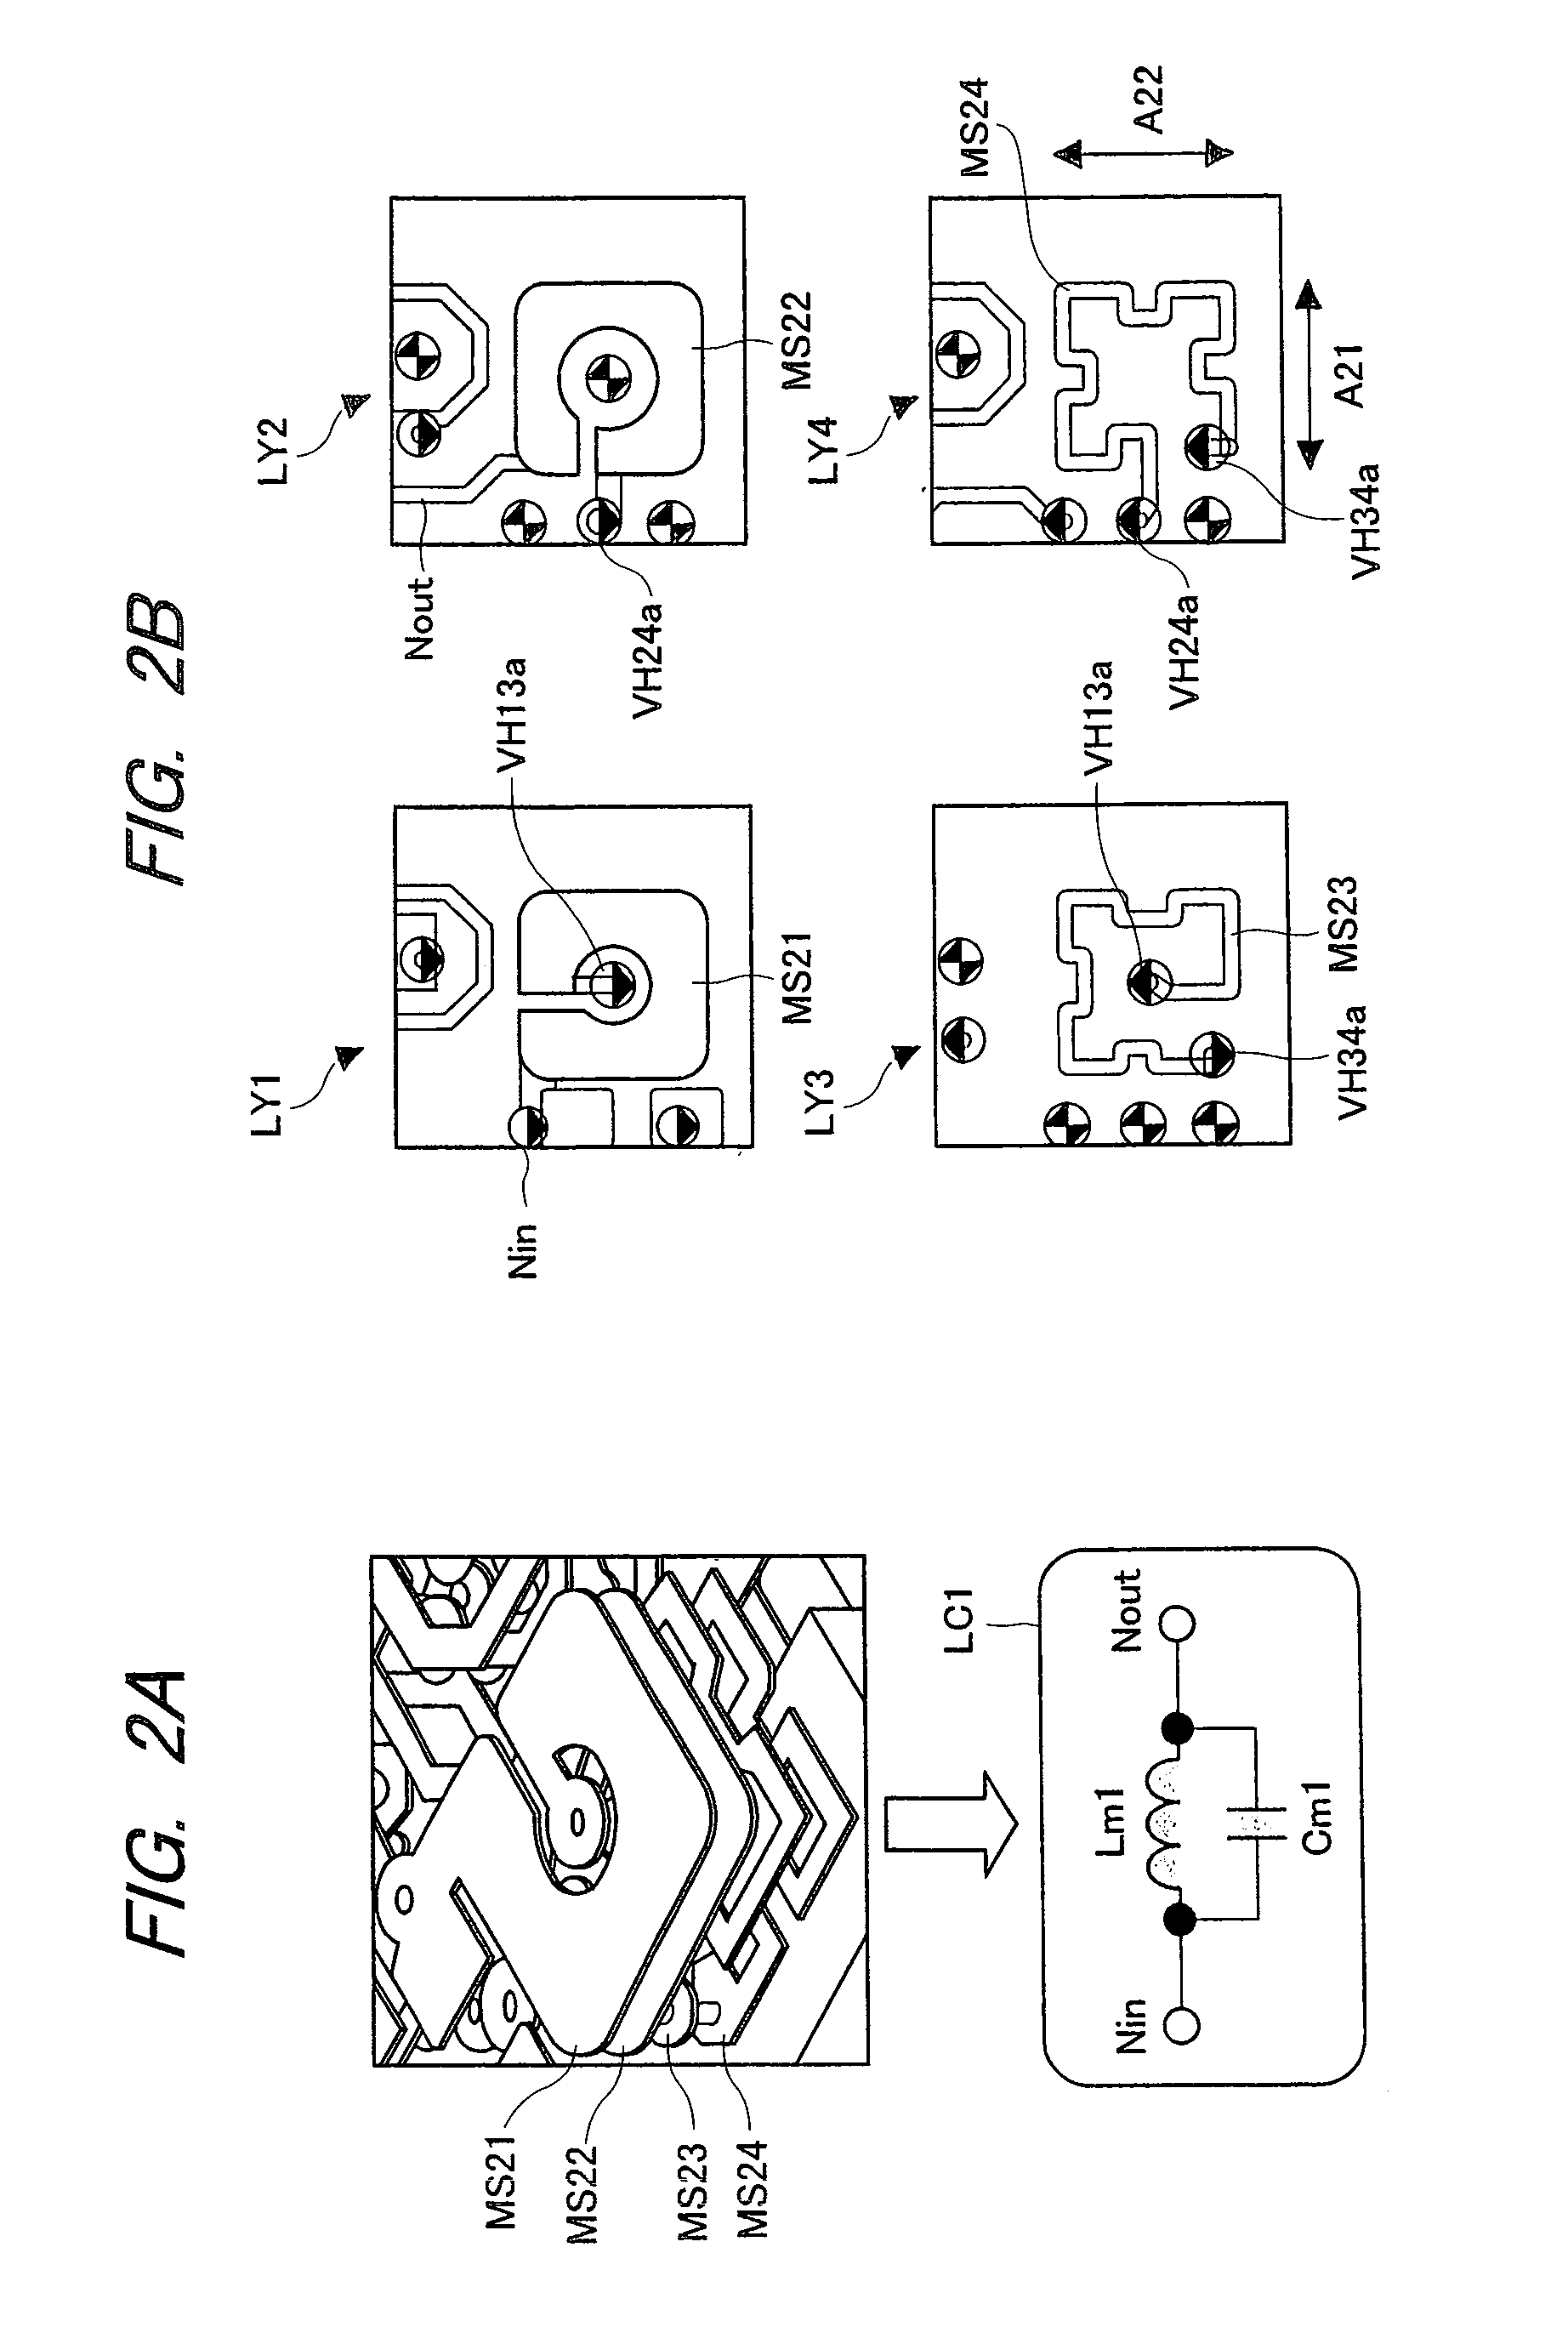 Electronic device and RF module